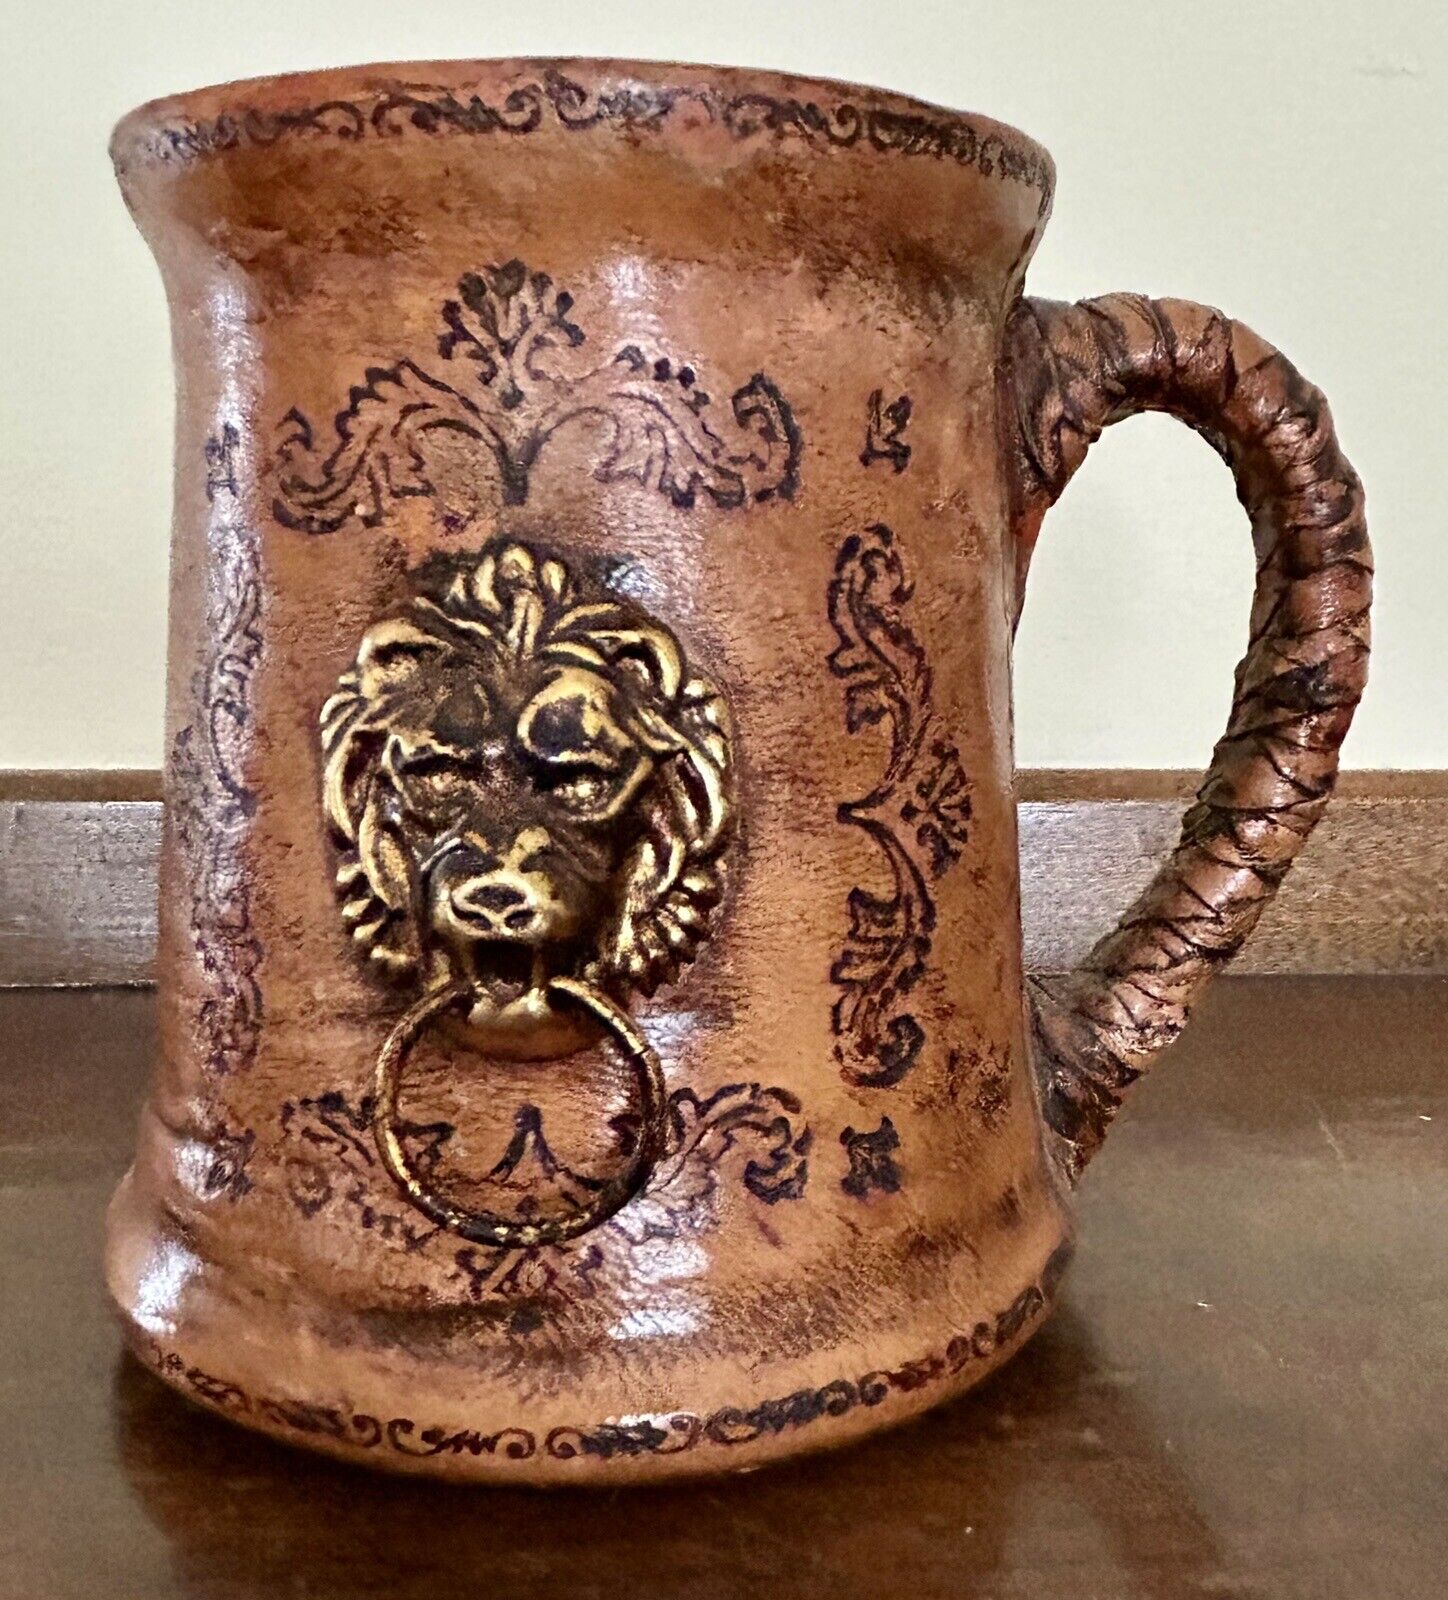 Glass Stein Mug Leather Wrapped w/Lions Head made in Italy 5” Tall 4.5” Wide